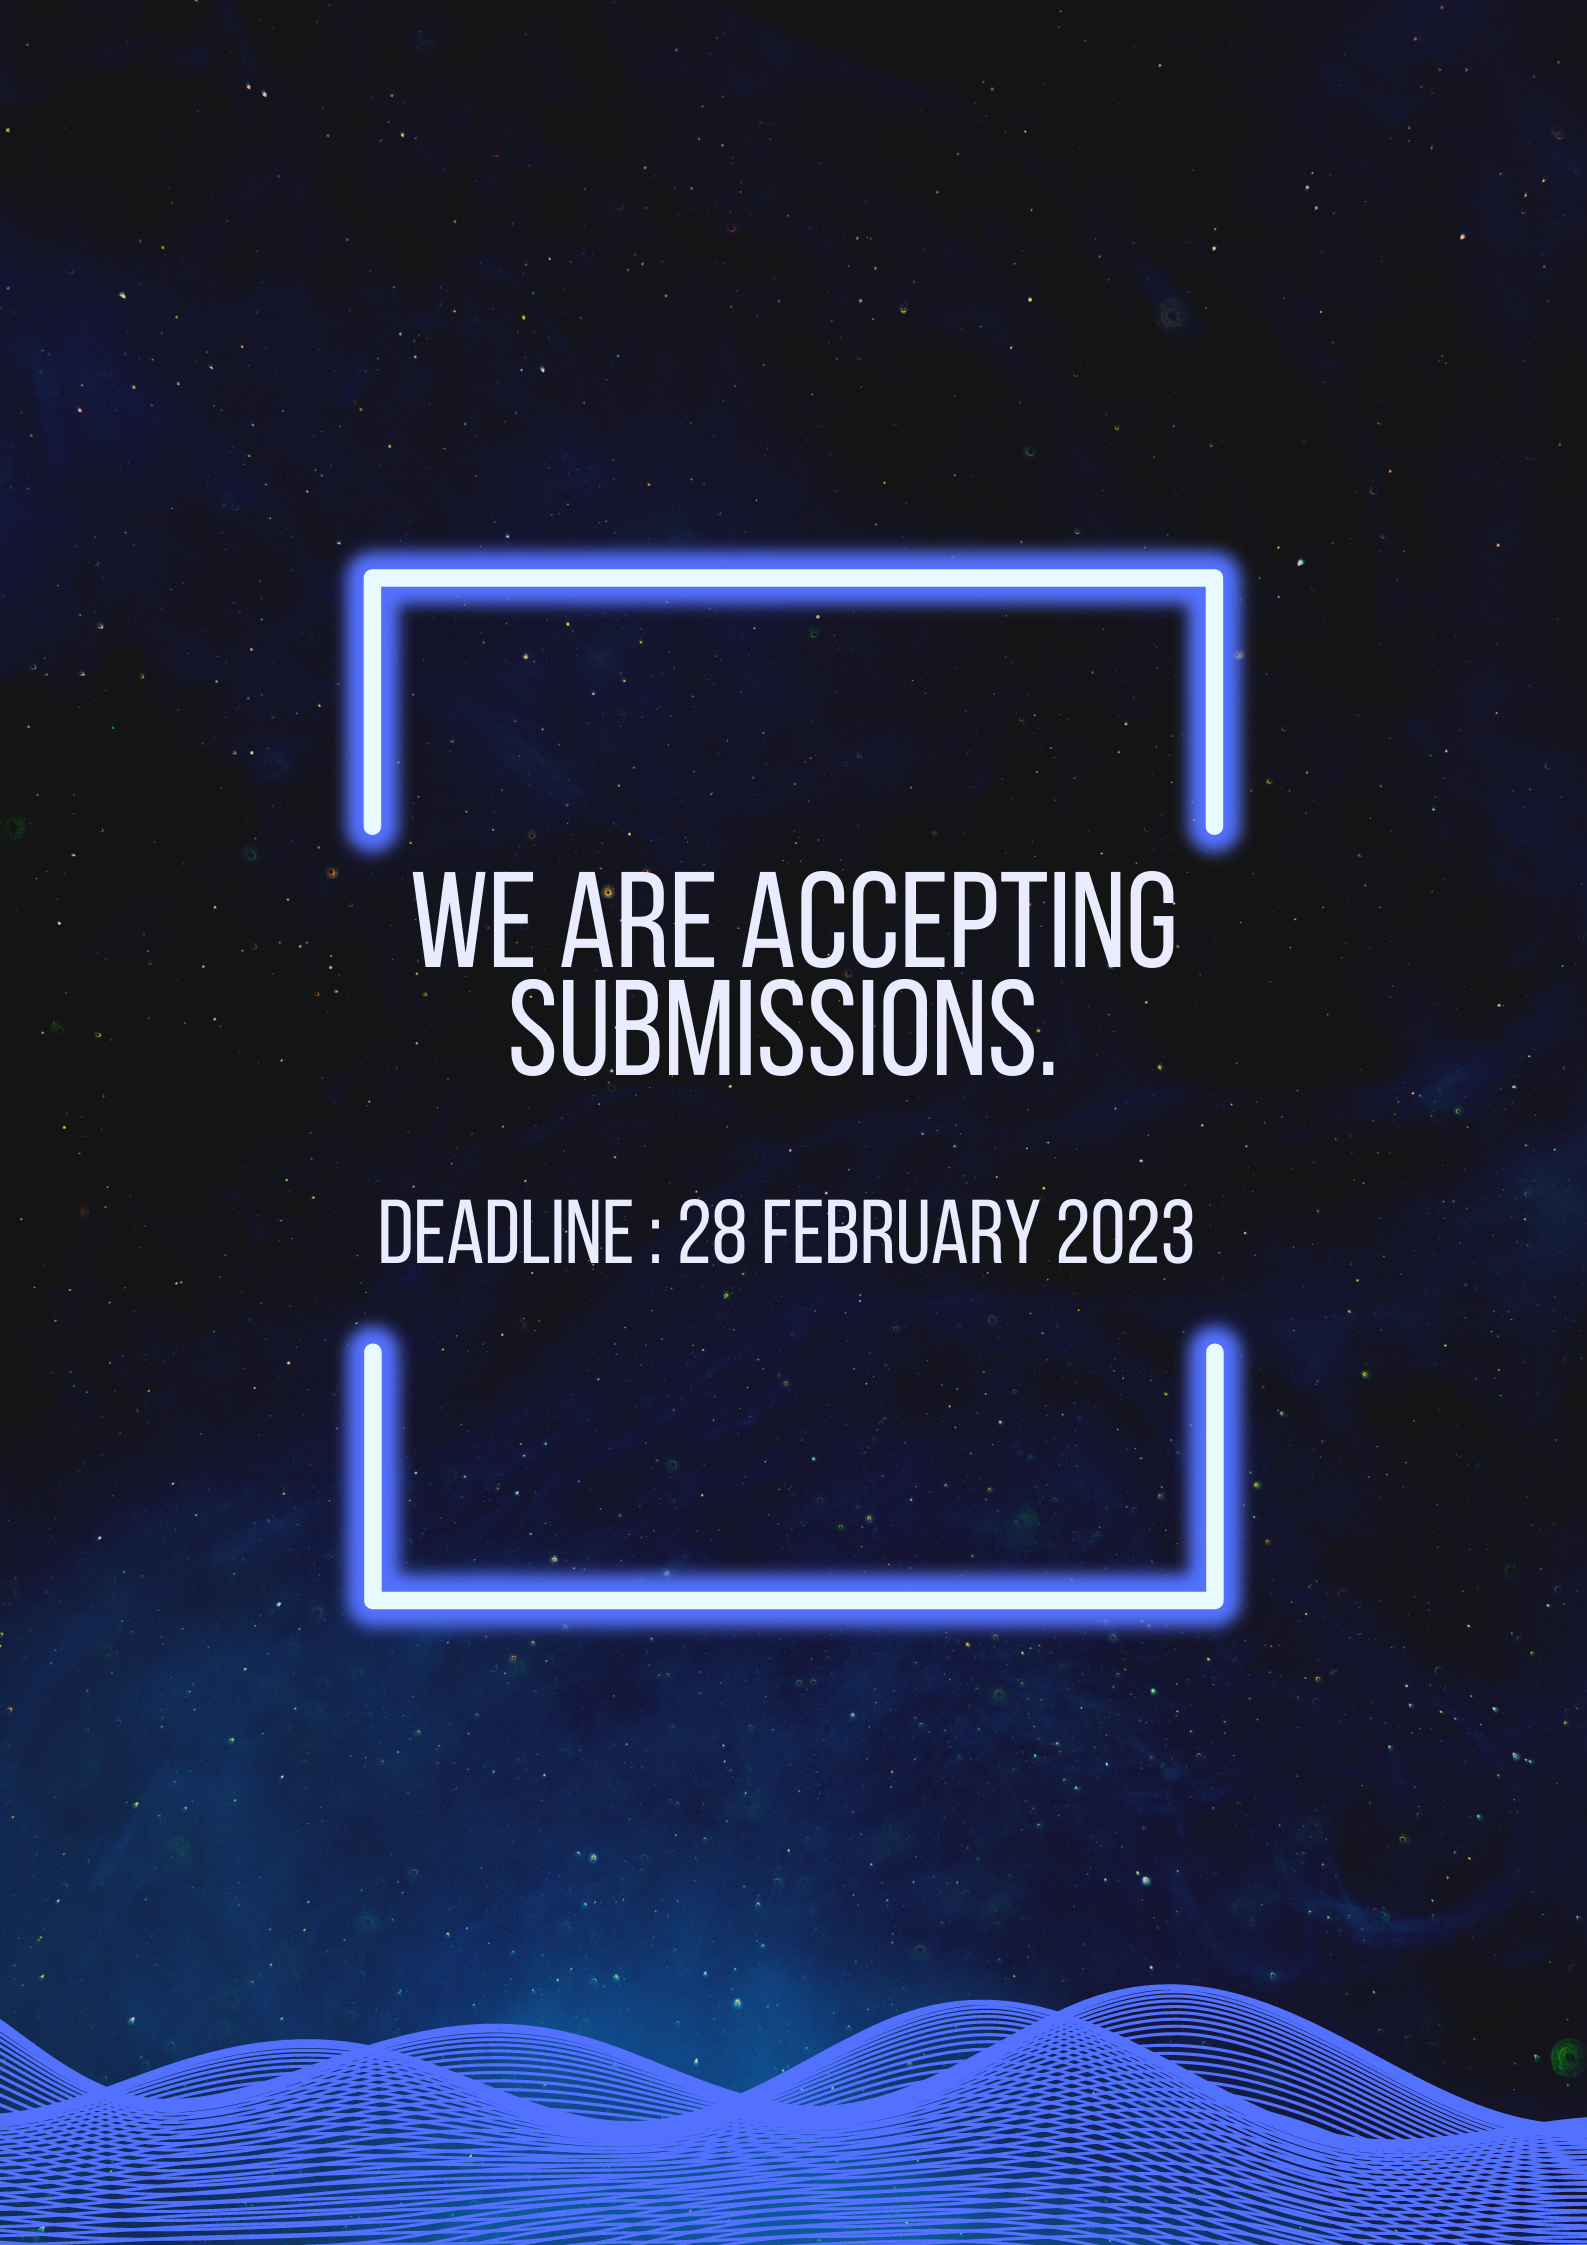 Submit your application here